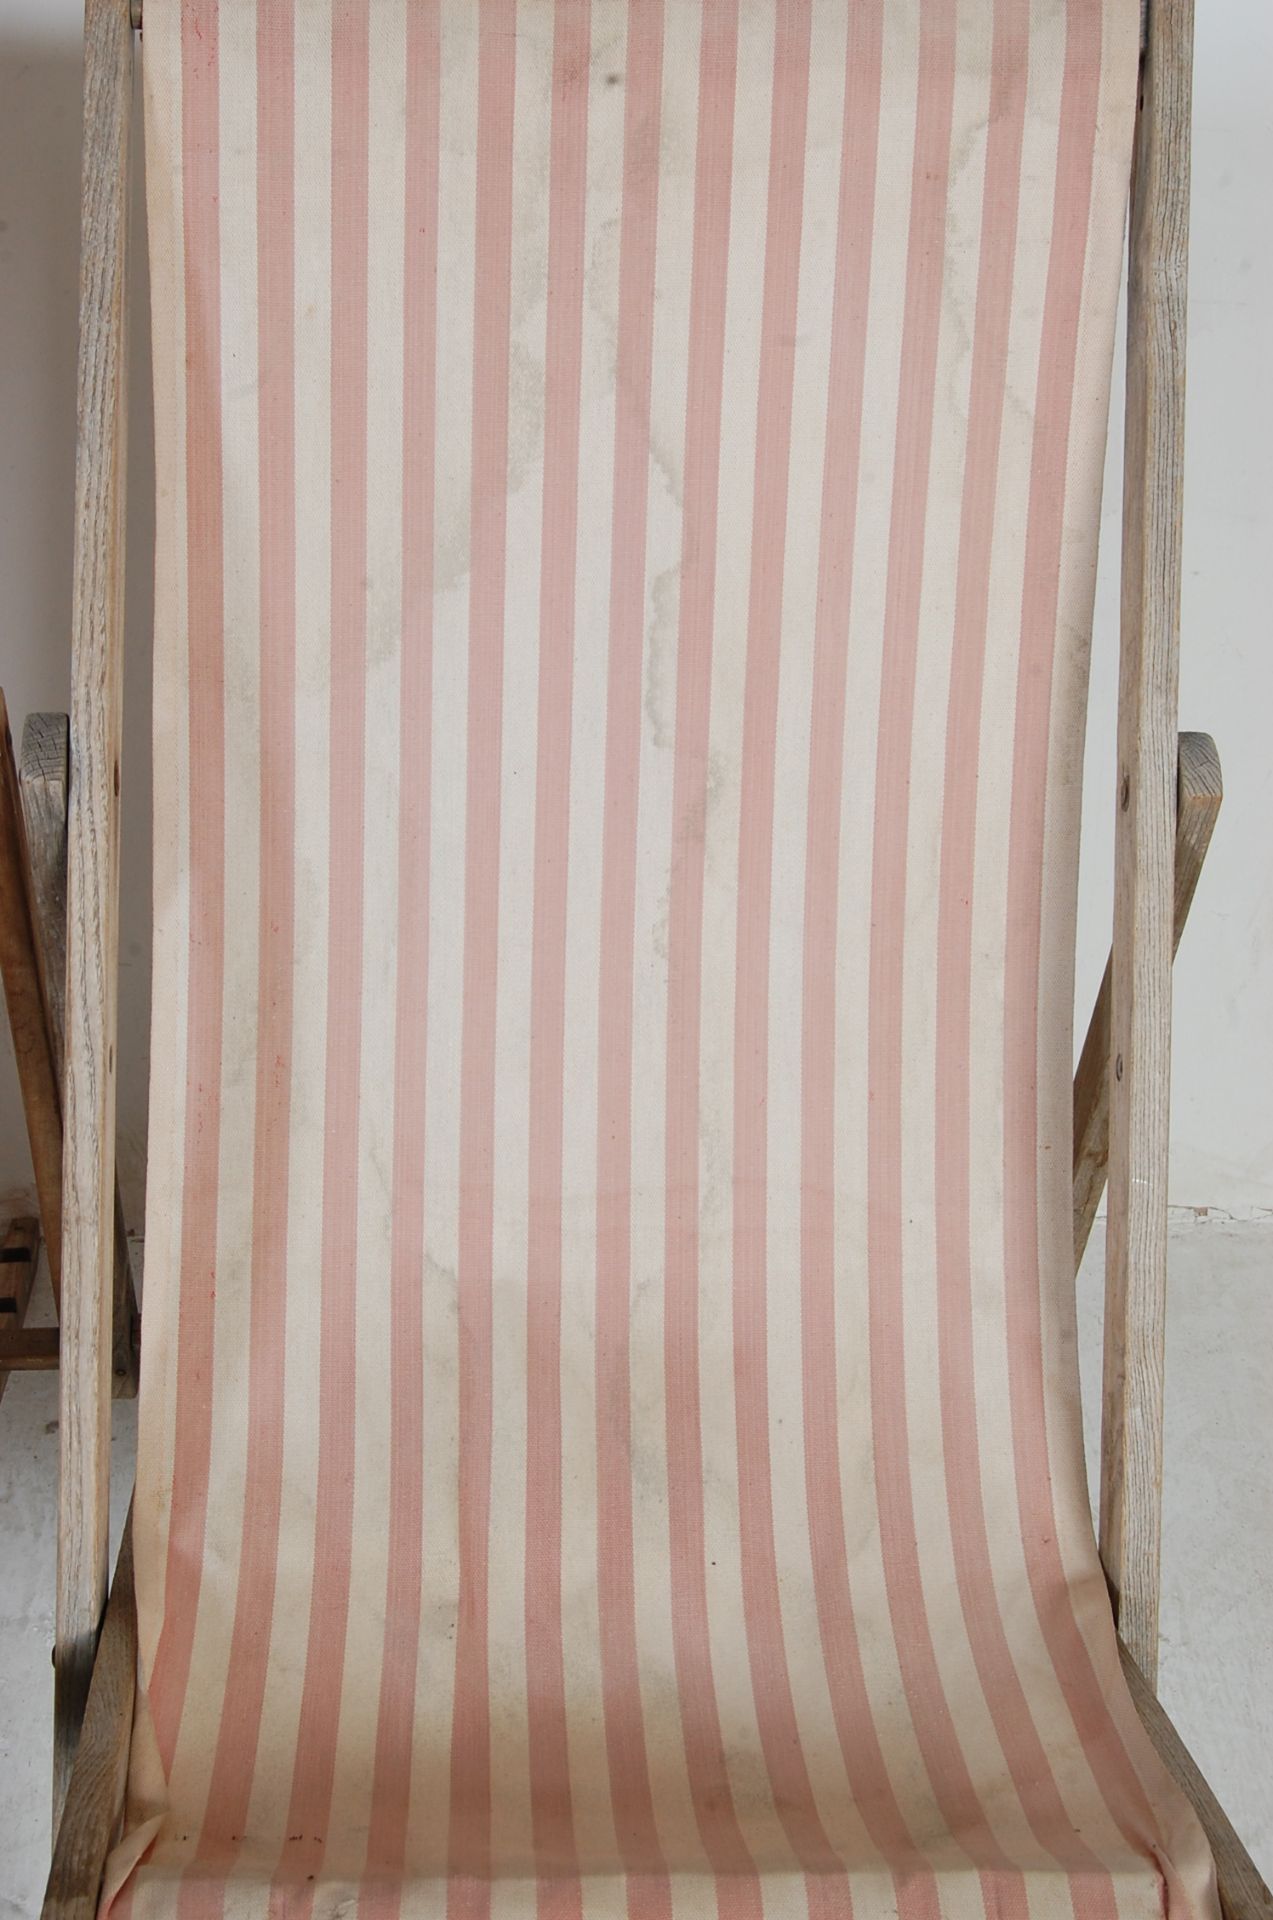 COLLECTION OF FOUR VINTAGE FOLDING DECK CHAIRS - Image 9 of 9